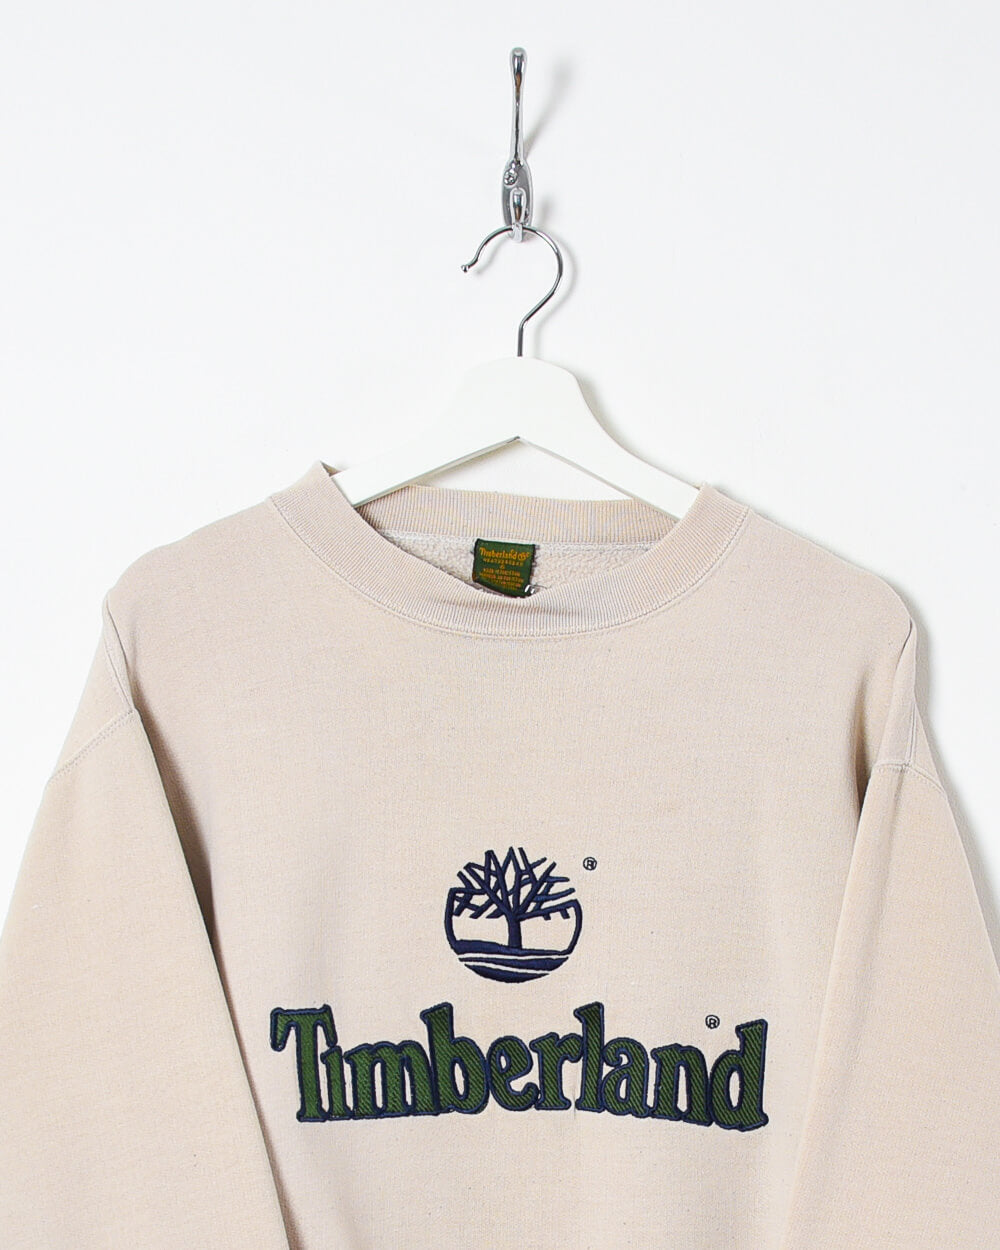 Timberland Sweatshirt - Small - Domno Vintage 90s, 80s, 00s Retro and Vintage Clothing 